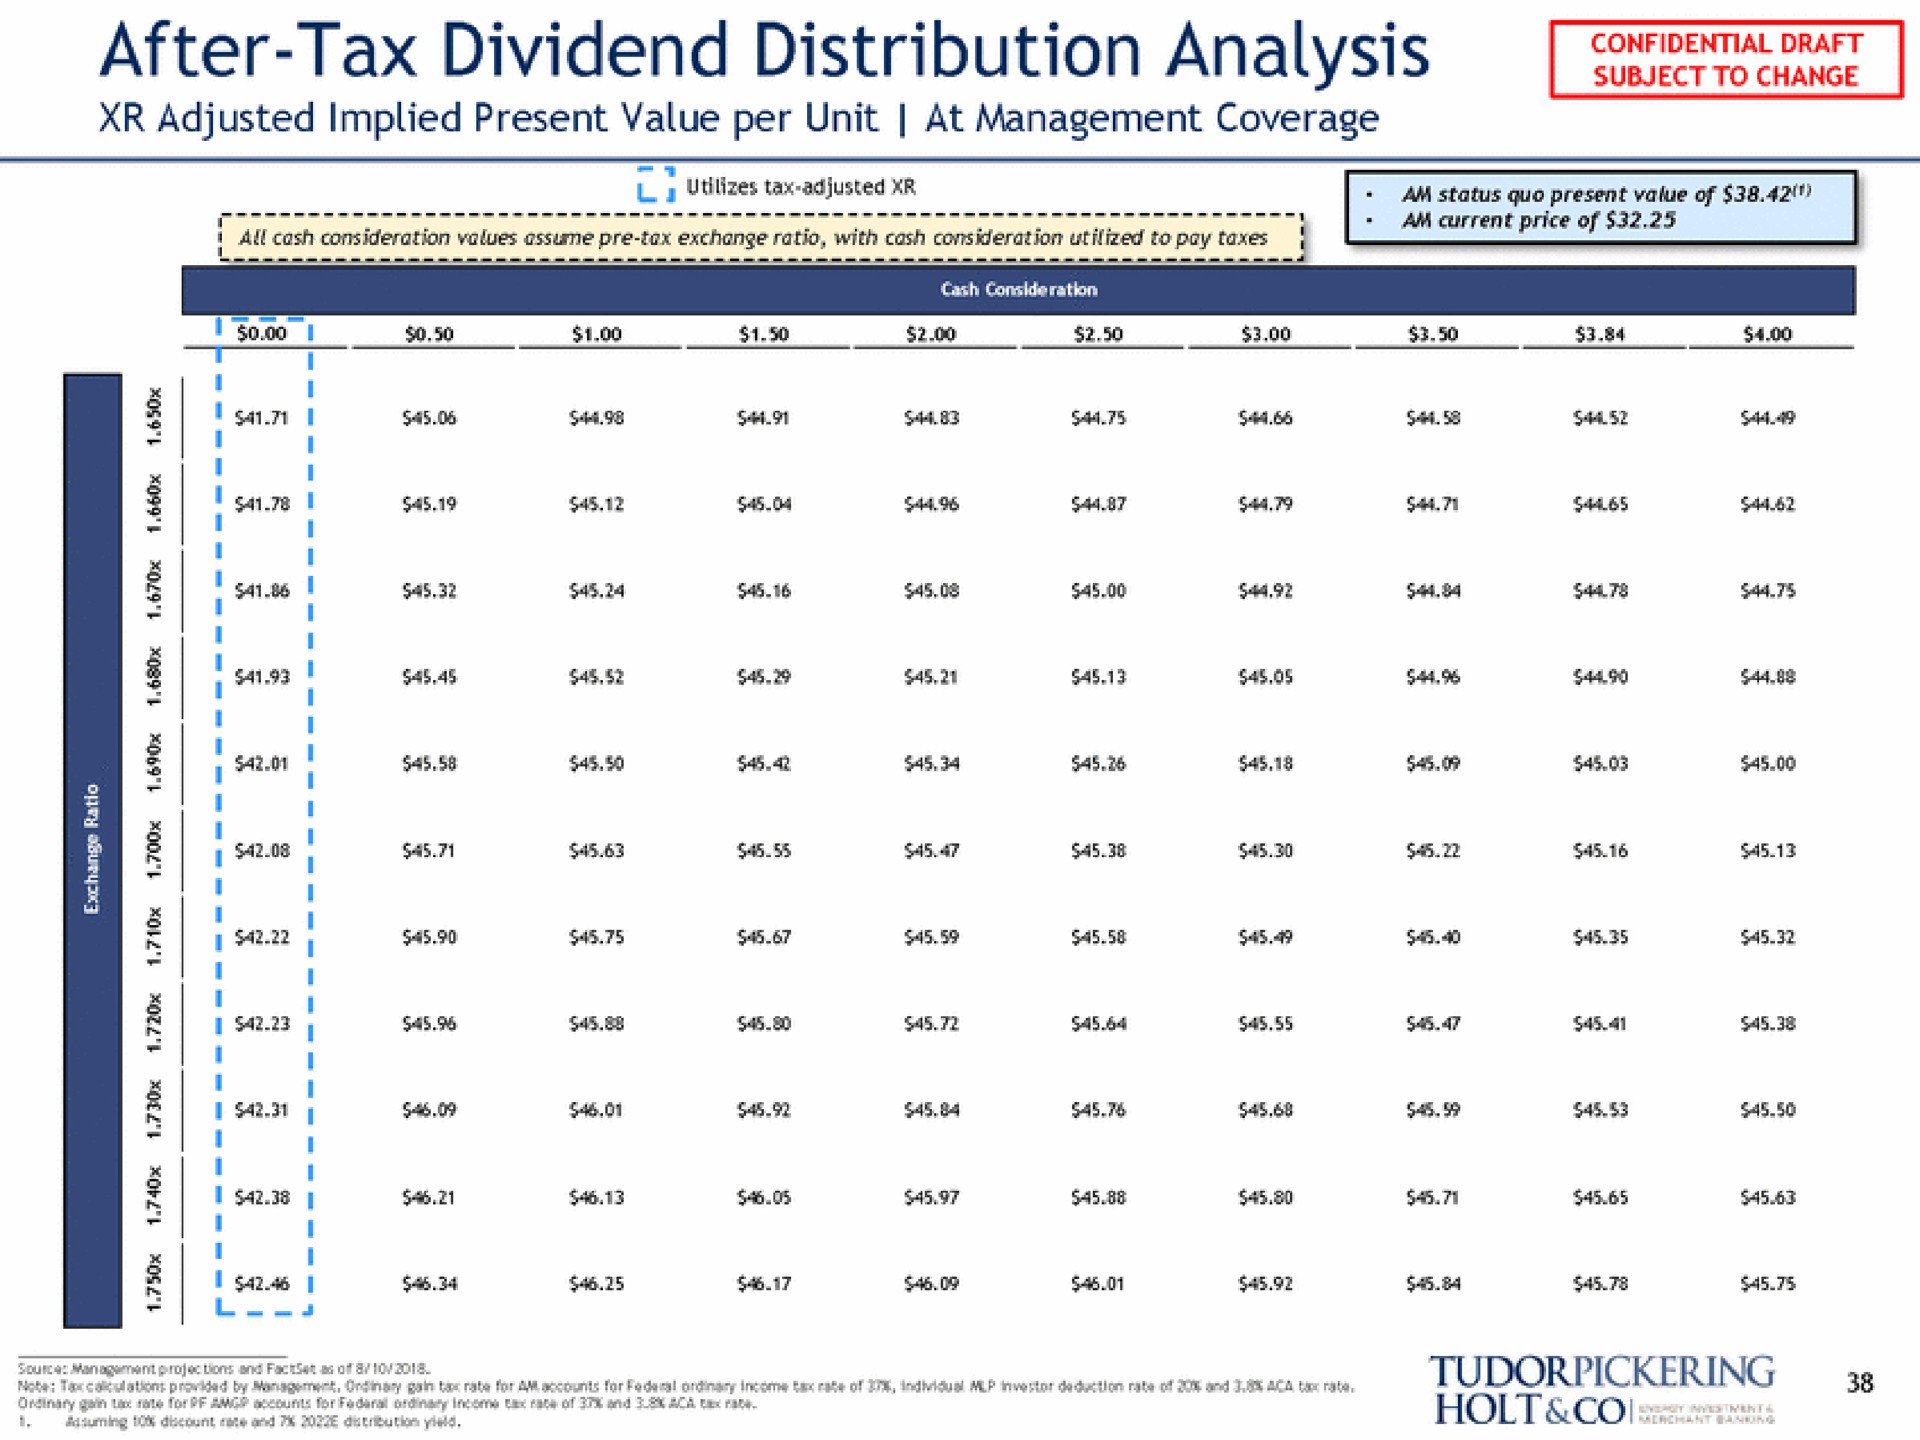 after tax dividend distribution analysis adjusted implied present value per unit at management coverage per | Tudor, Pickering, Holt & Co